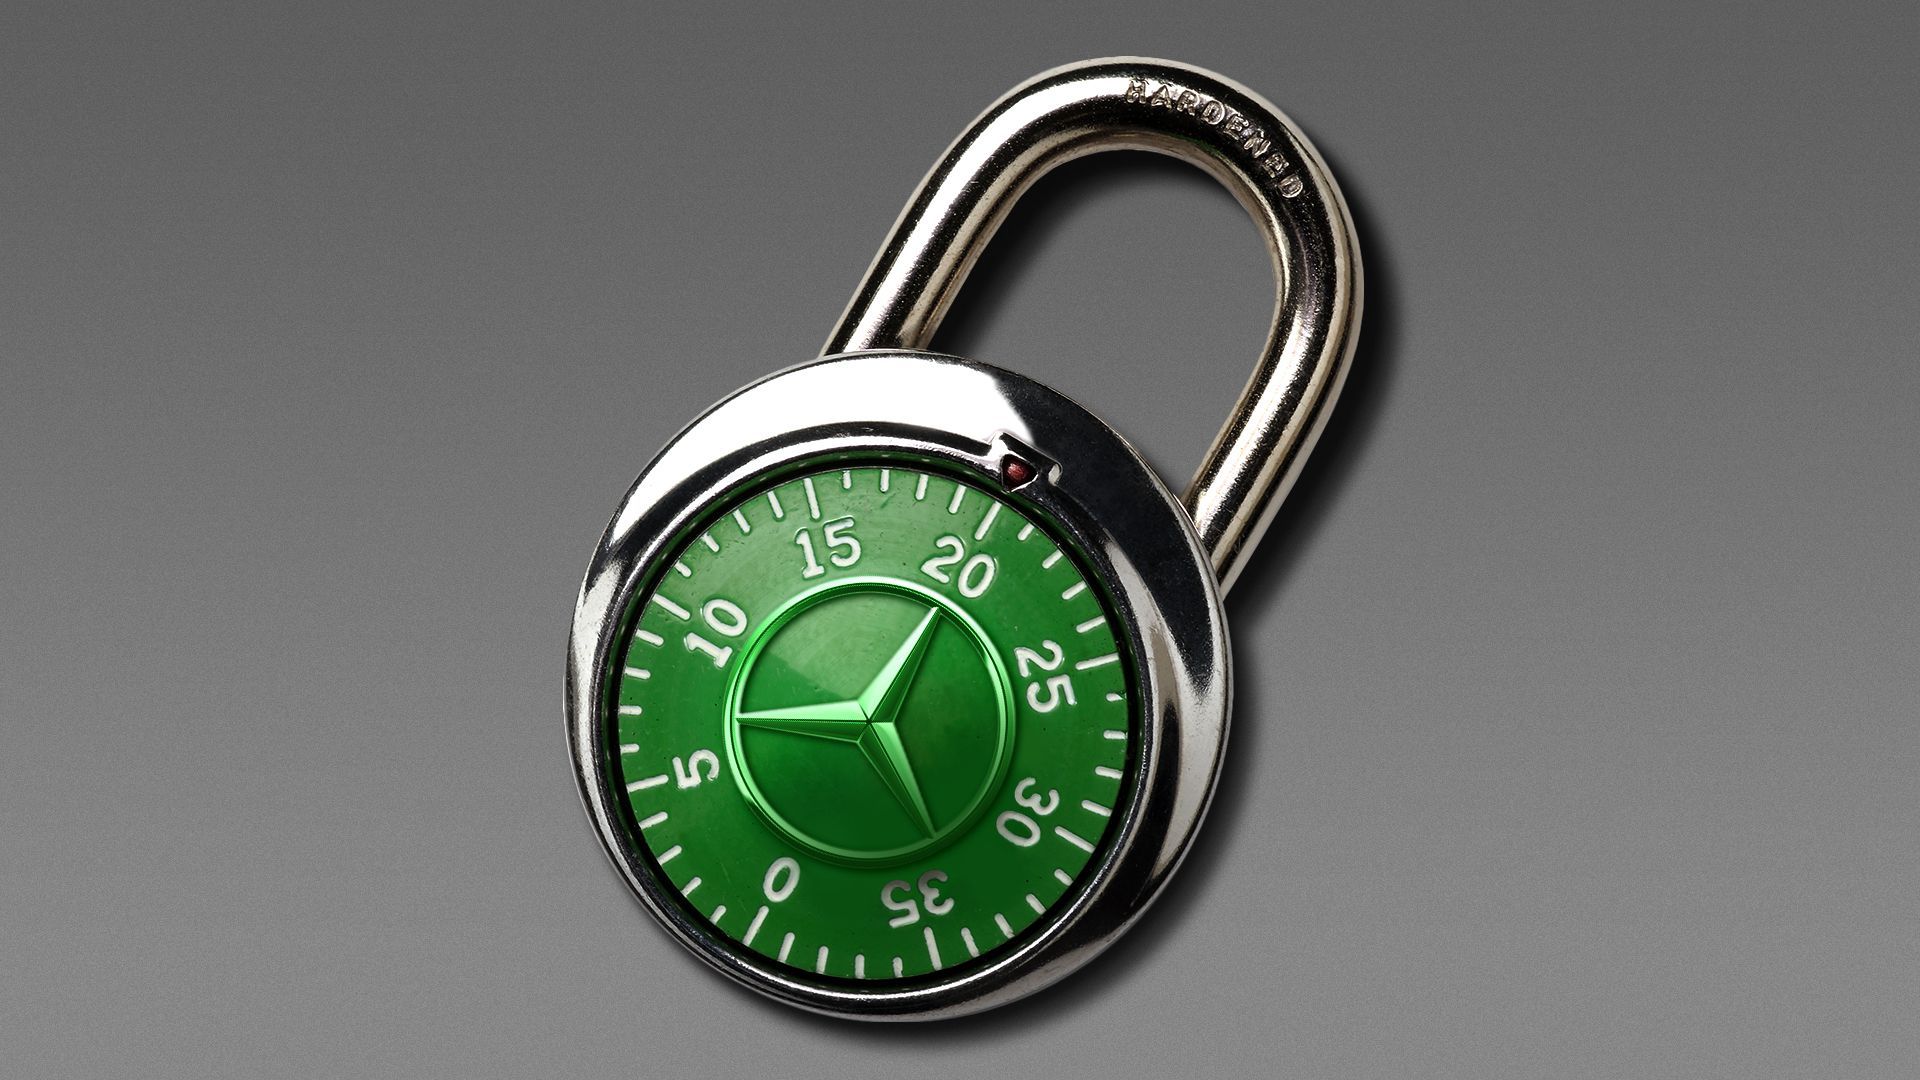 Illustration of a padlock with a Mercedes Benz logo at the dial